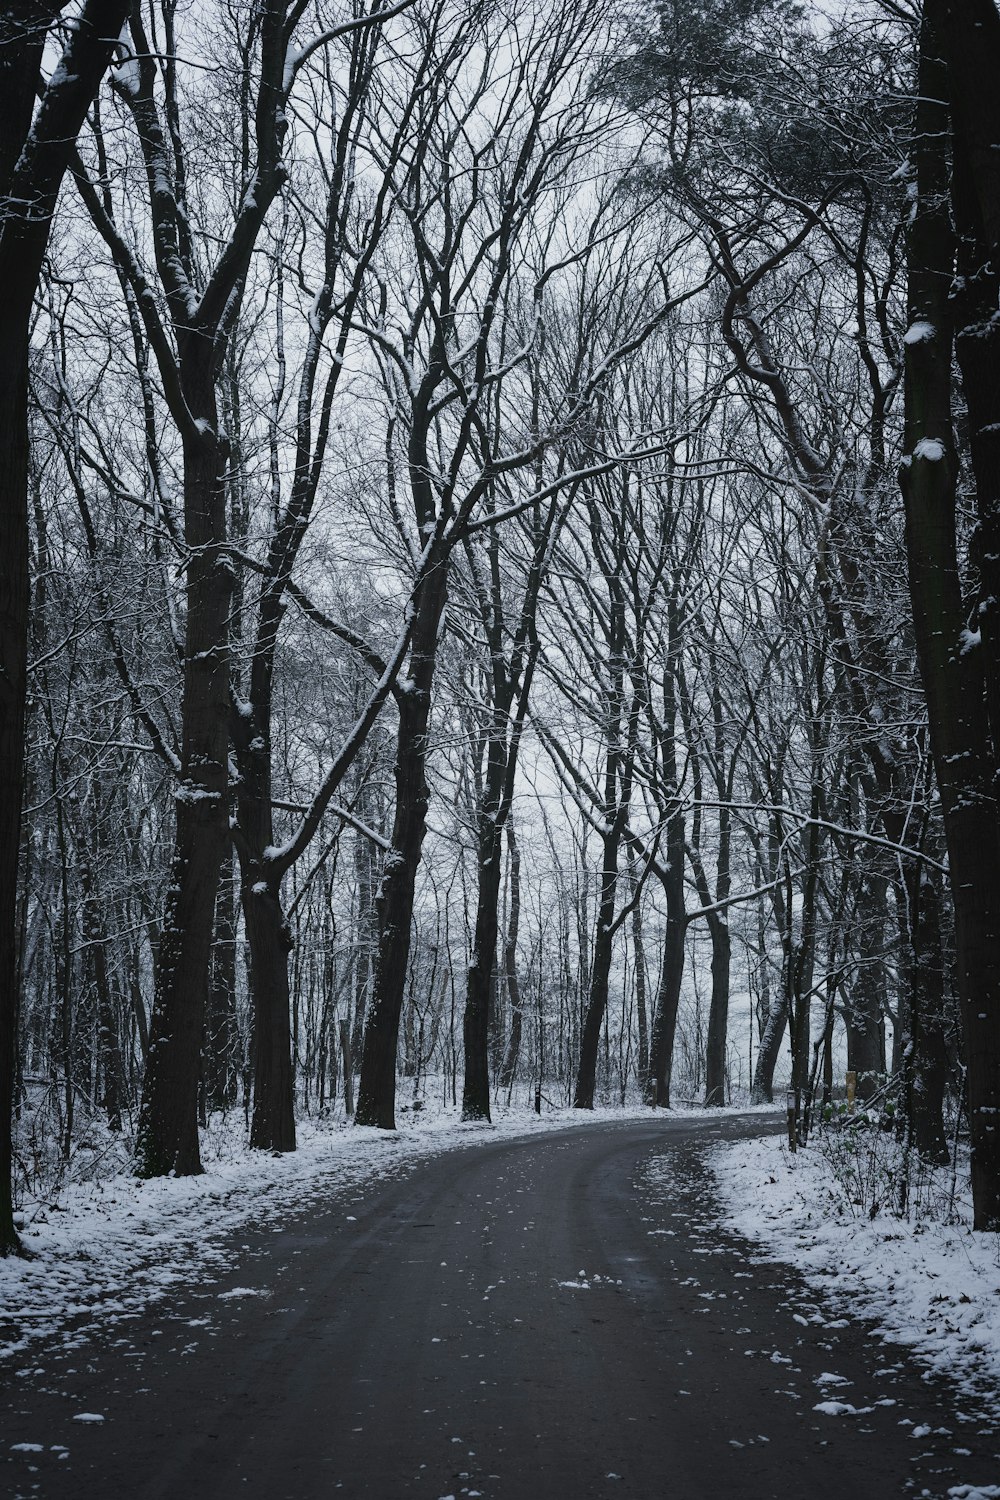 snow covered road between bare trees